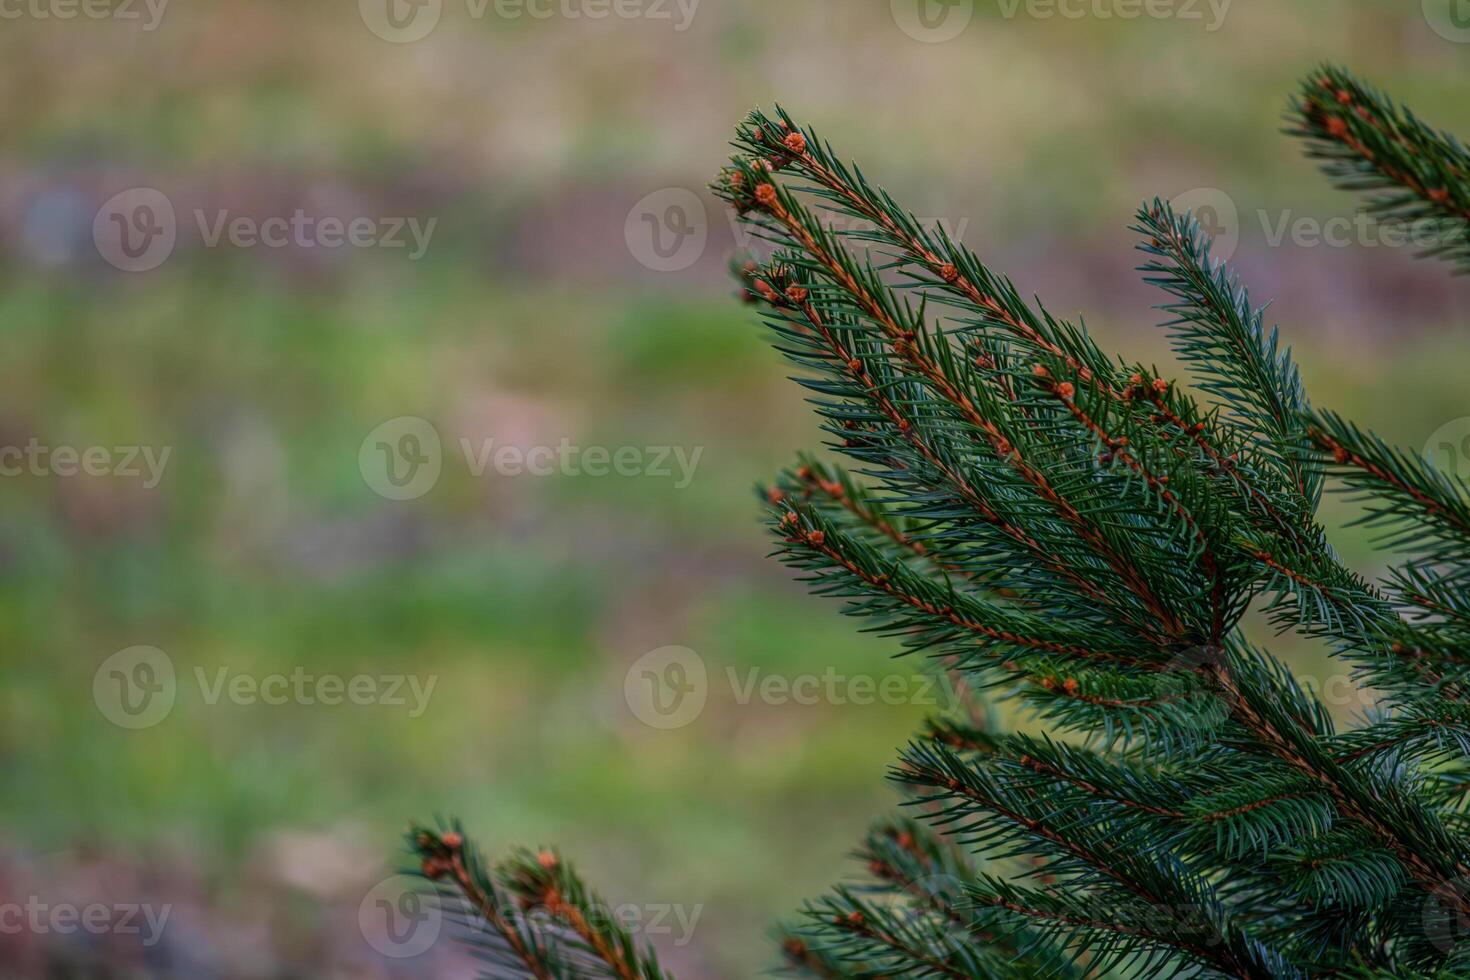 Background, abstraction of Christmas tree twigs with needles on a blurry photo